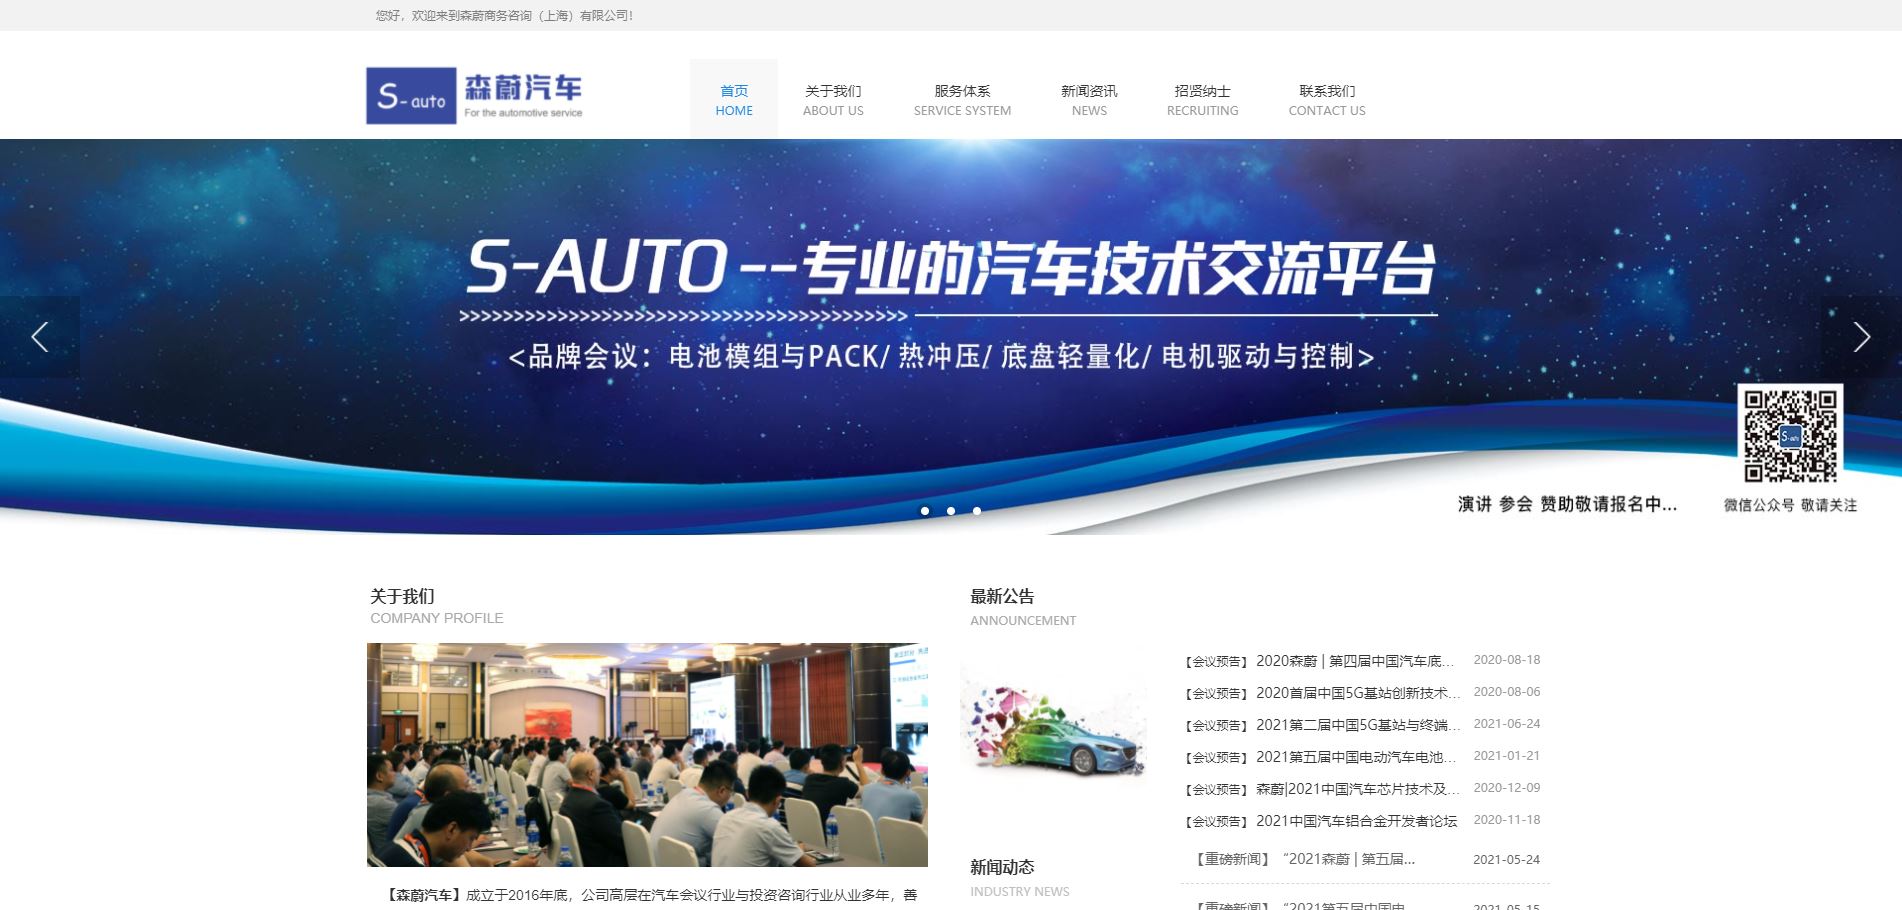  GH participates in the automotive fair in China